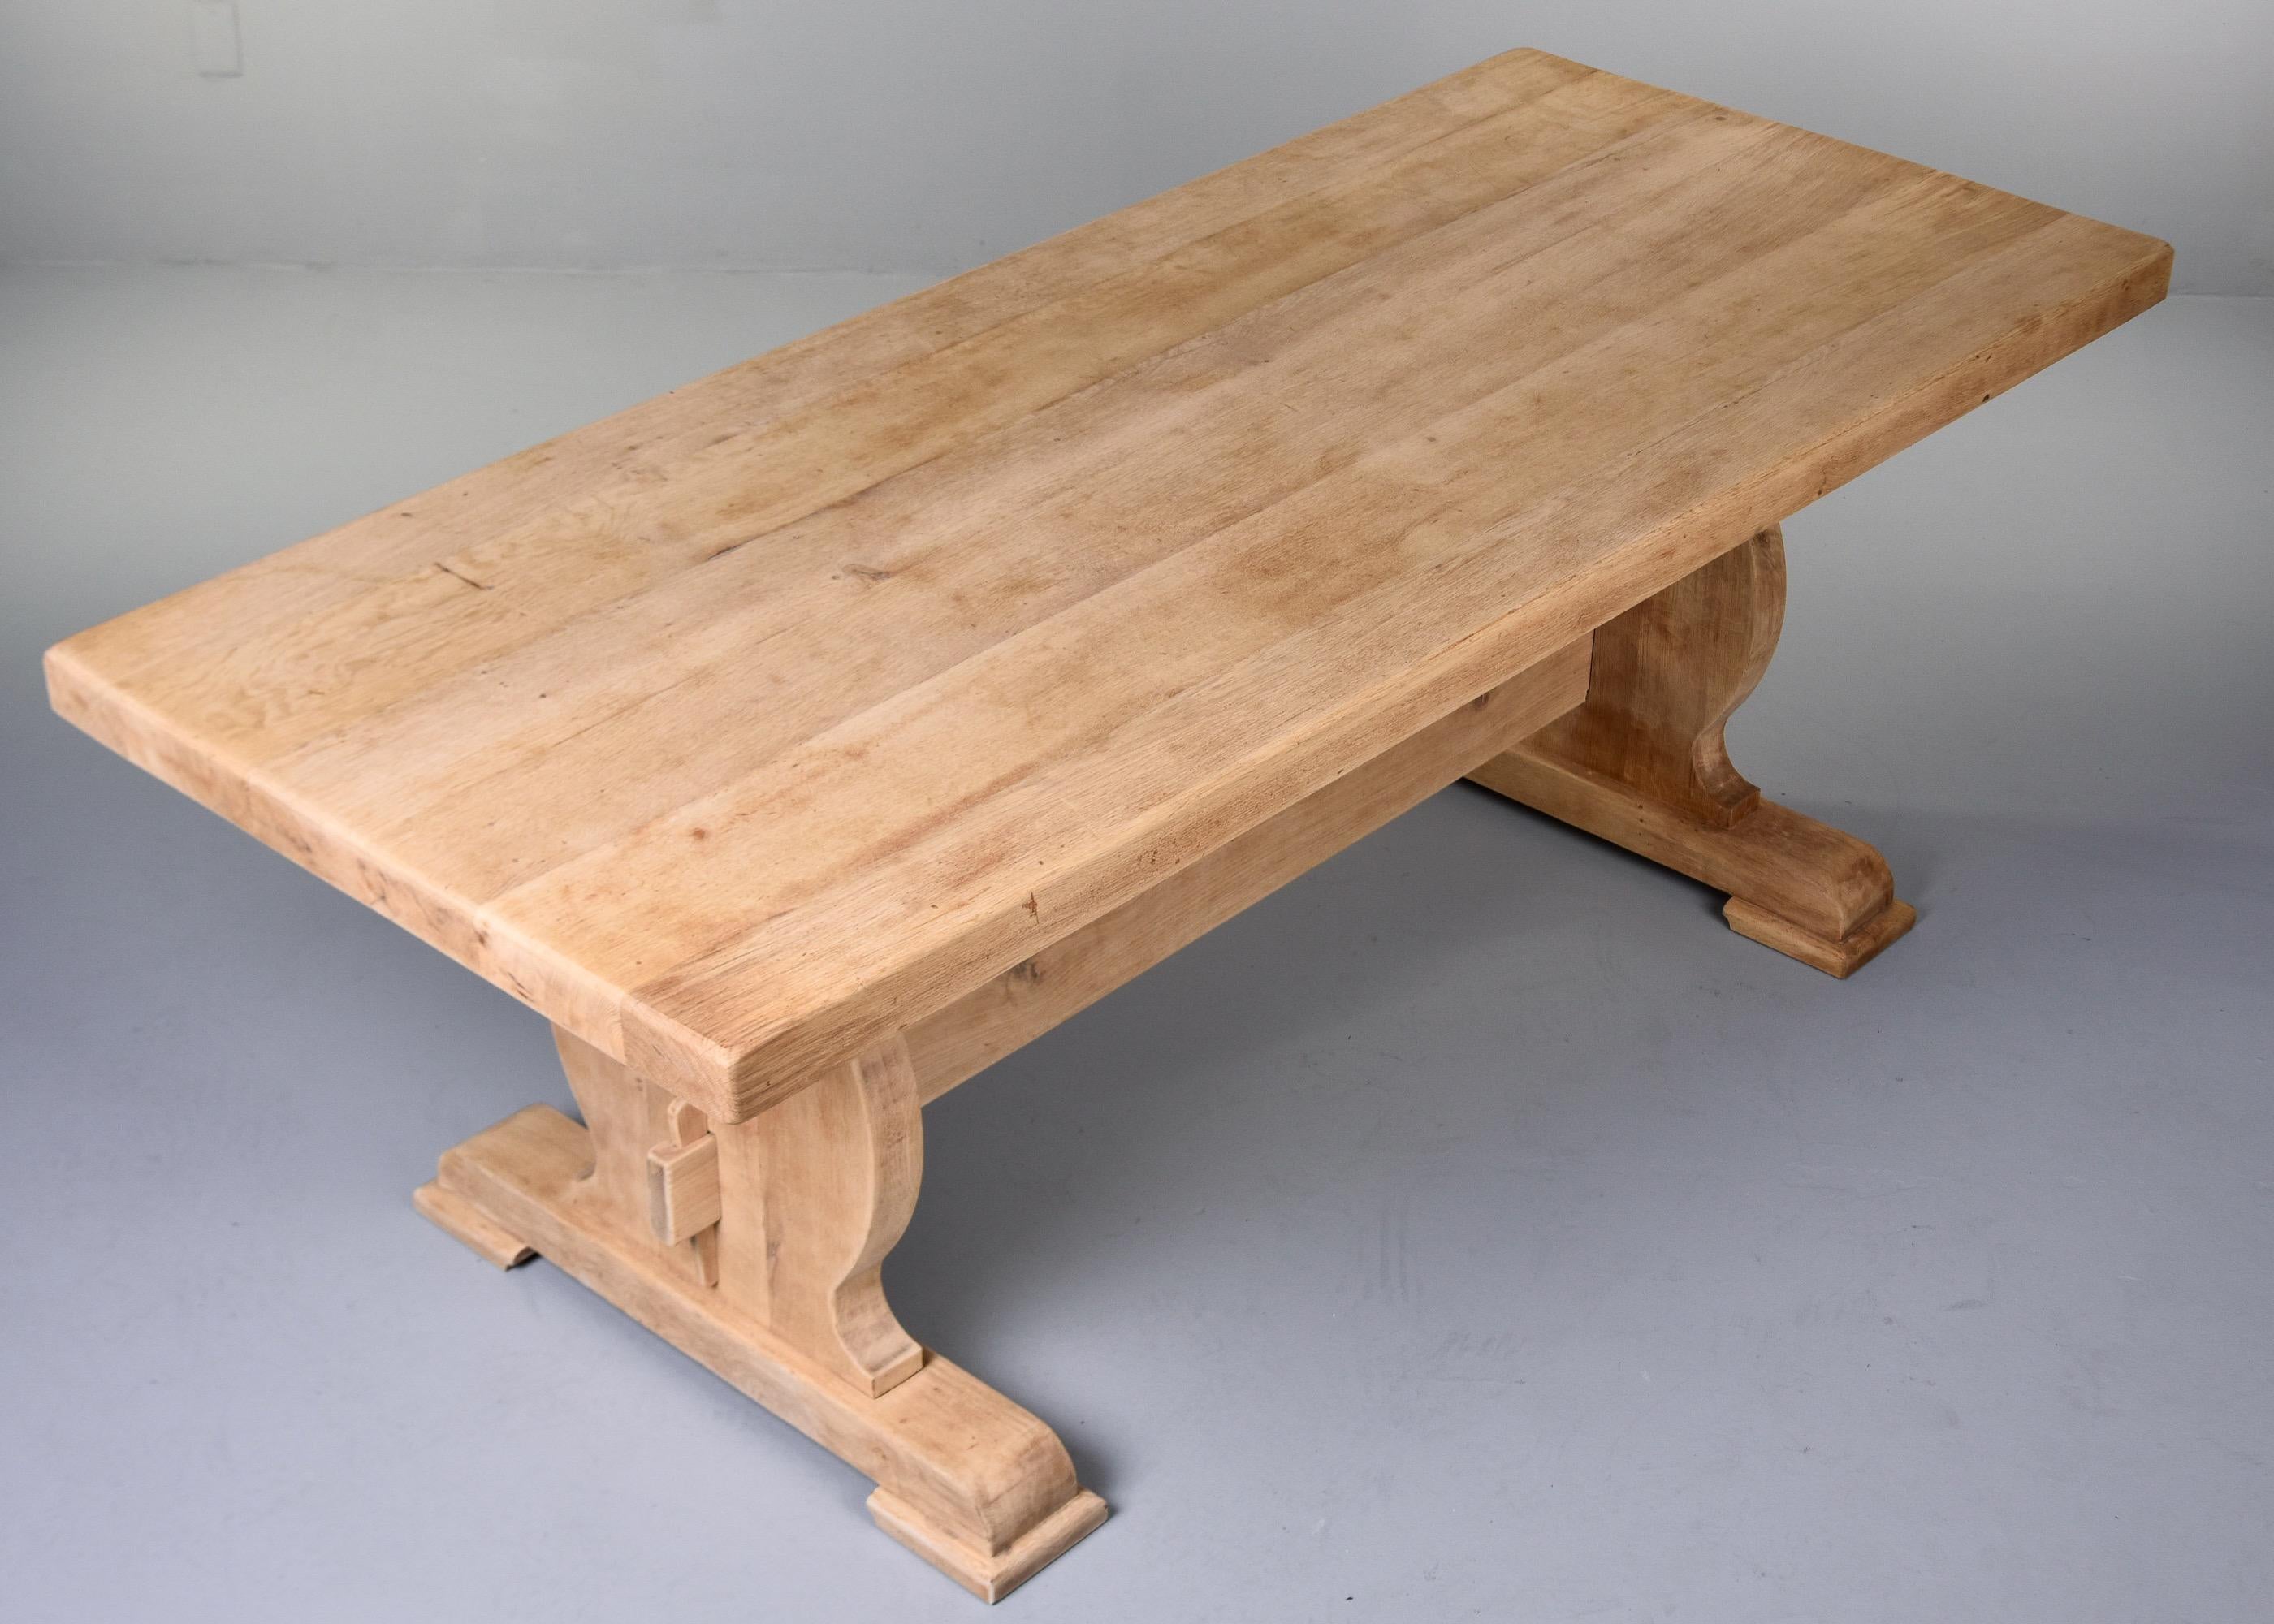 Circa 1900 Sanded Bare Oak French Country Trestle Table For Sale 6